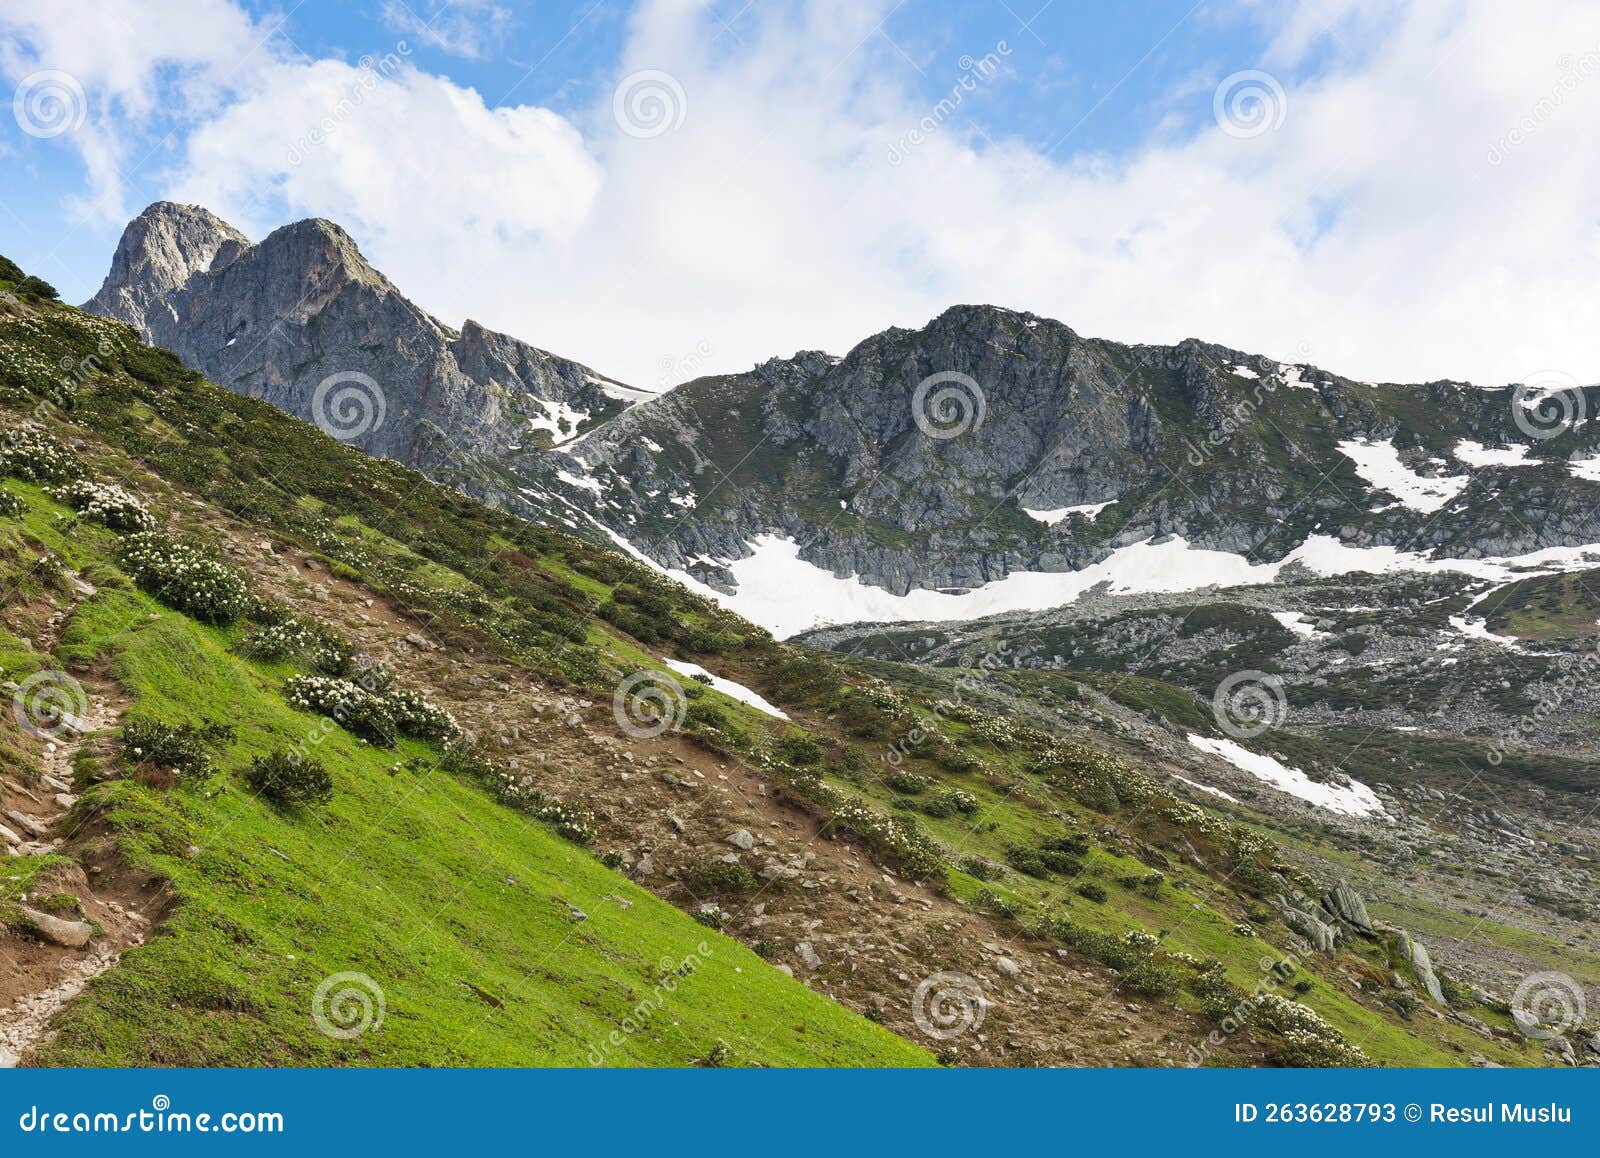 Kackar Mountains in Rize, Turkey. Stock Image - Image of glacial ...